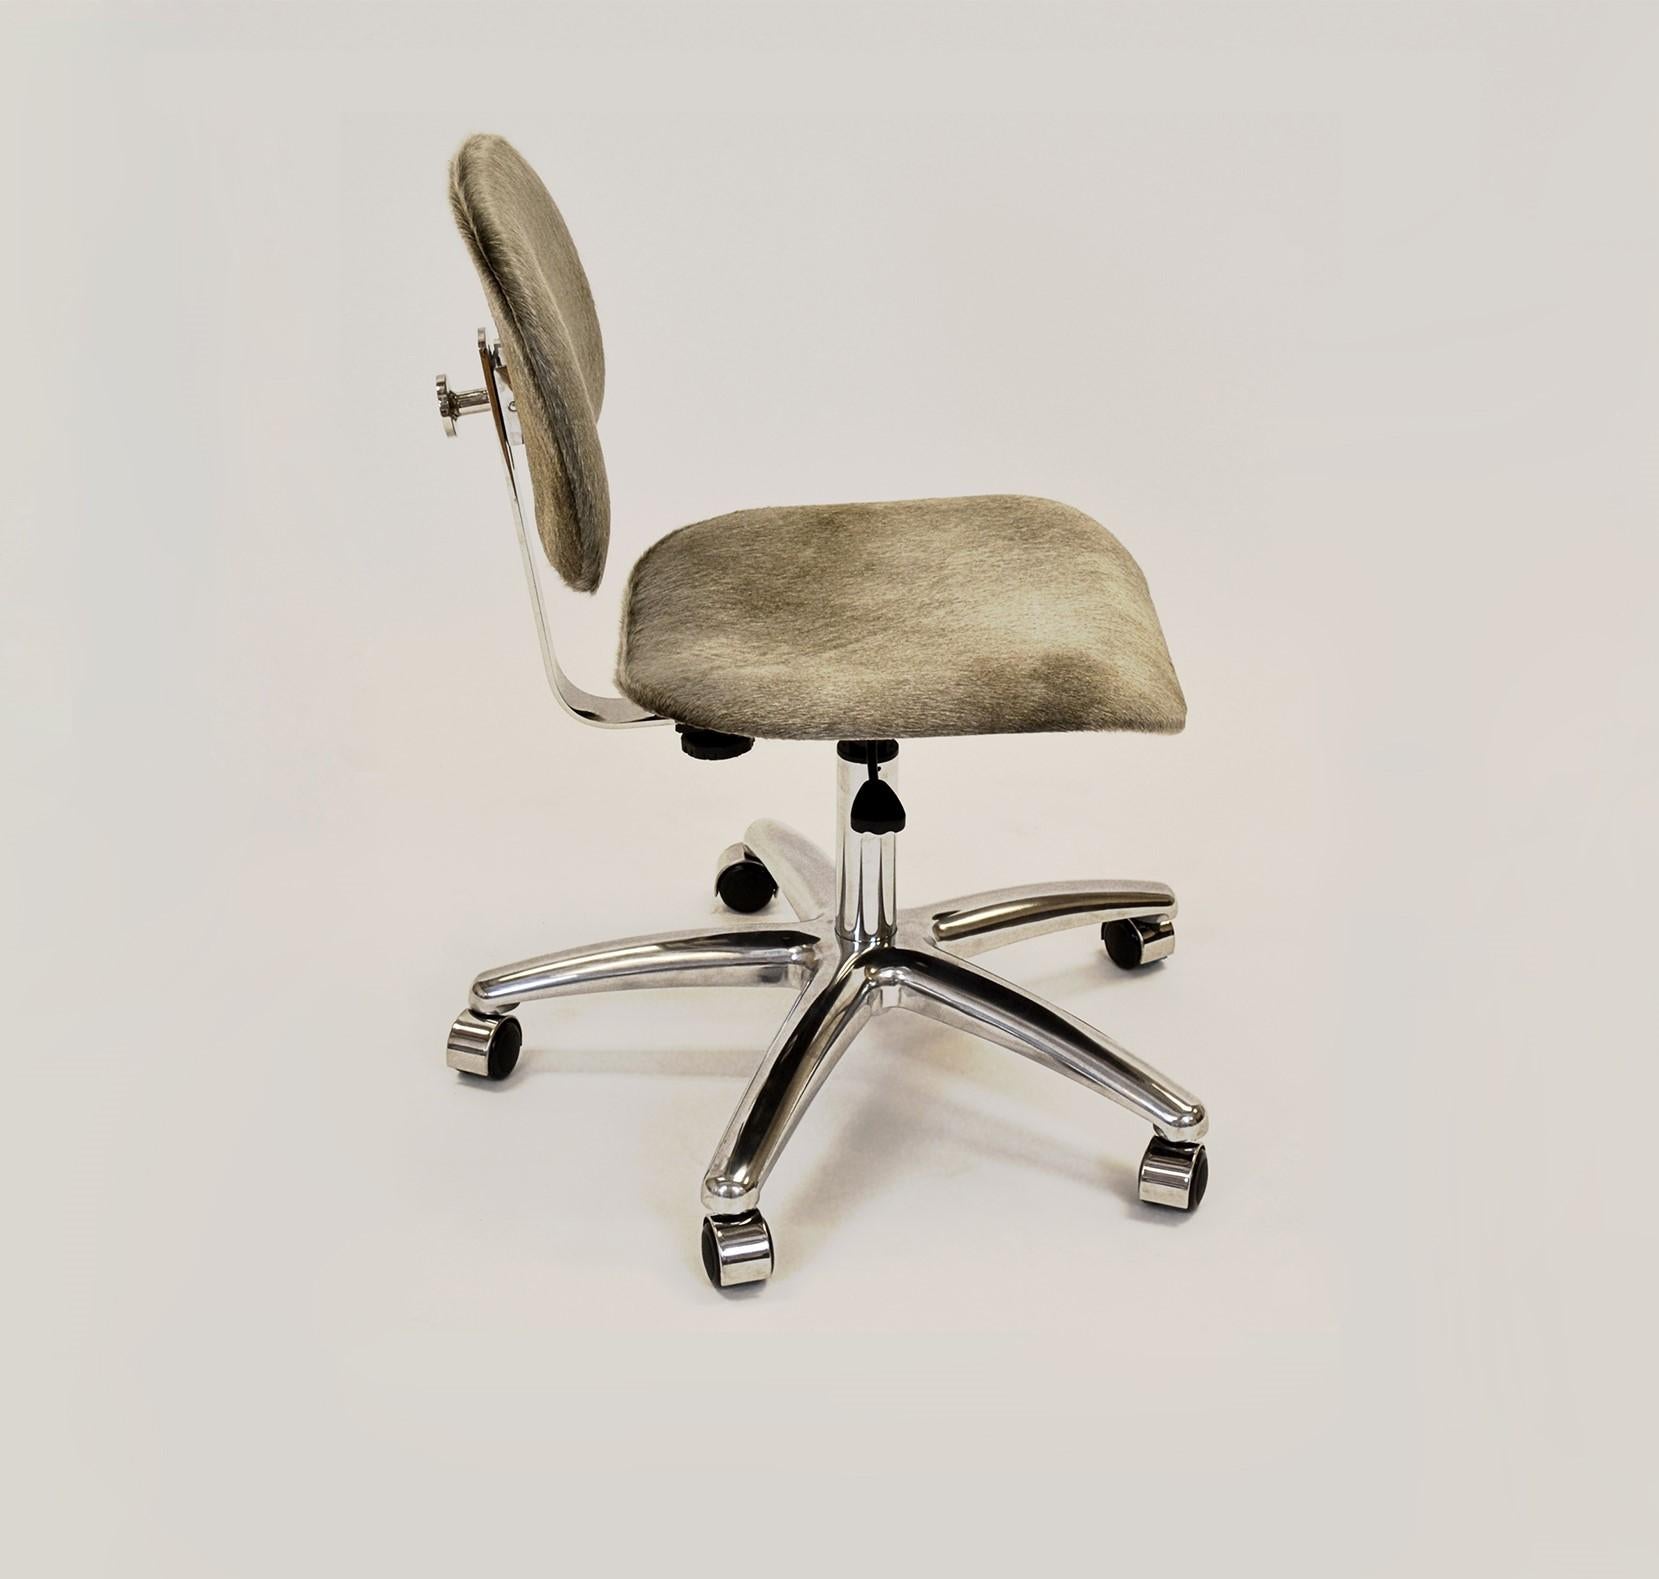 Task chair by Gentner Design
Dimensions: D 48 x W 50.8 x H 81 cm
Materials: stainless steel, hair on hide leather

A twist on the classic task chair, the hair-on-hide chair adds a refined touch to any desk. So rarely are precious materials